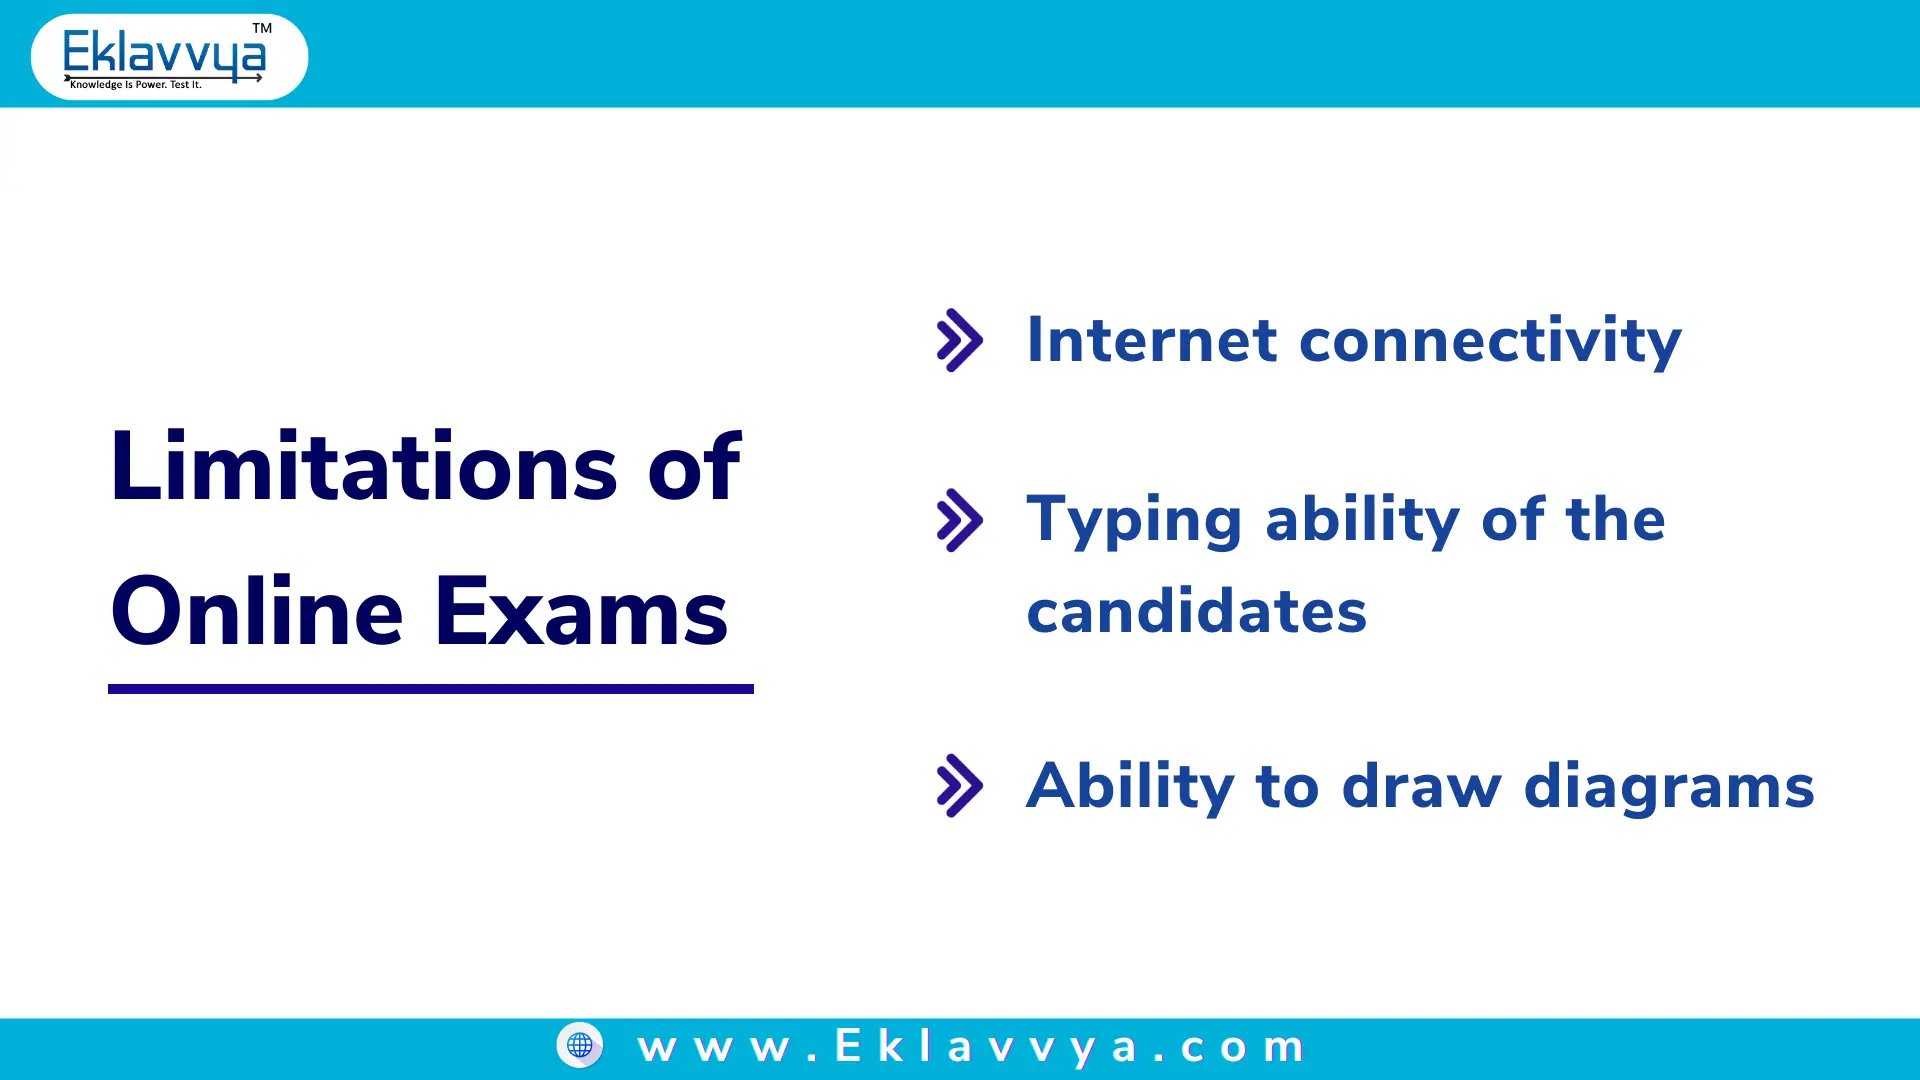 Limitations of Online Exams